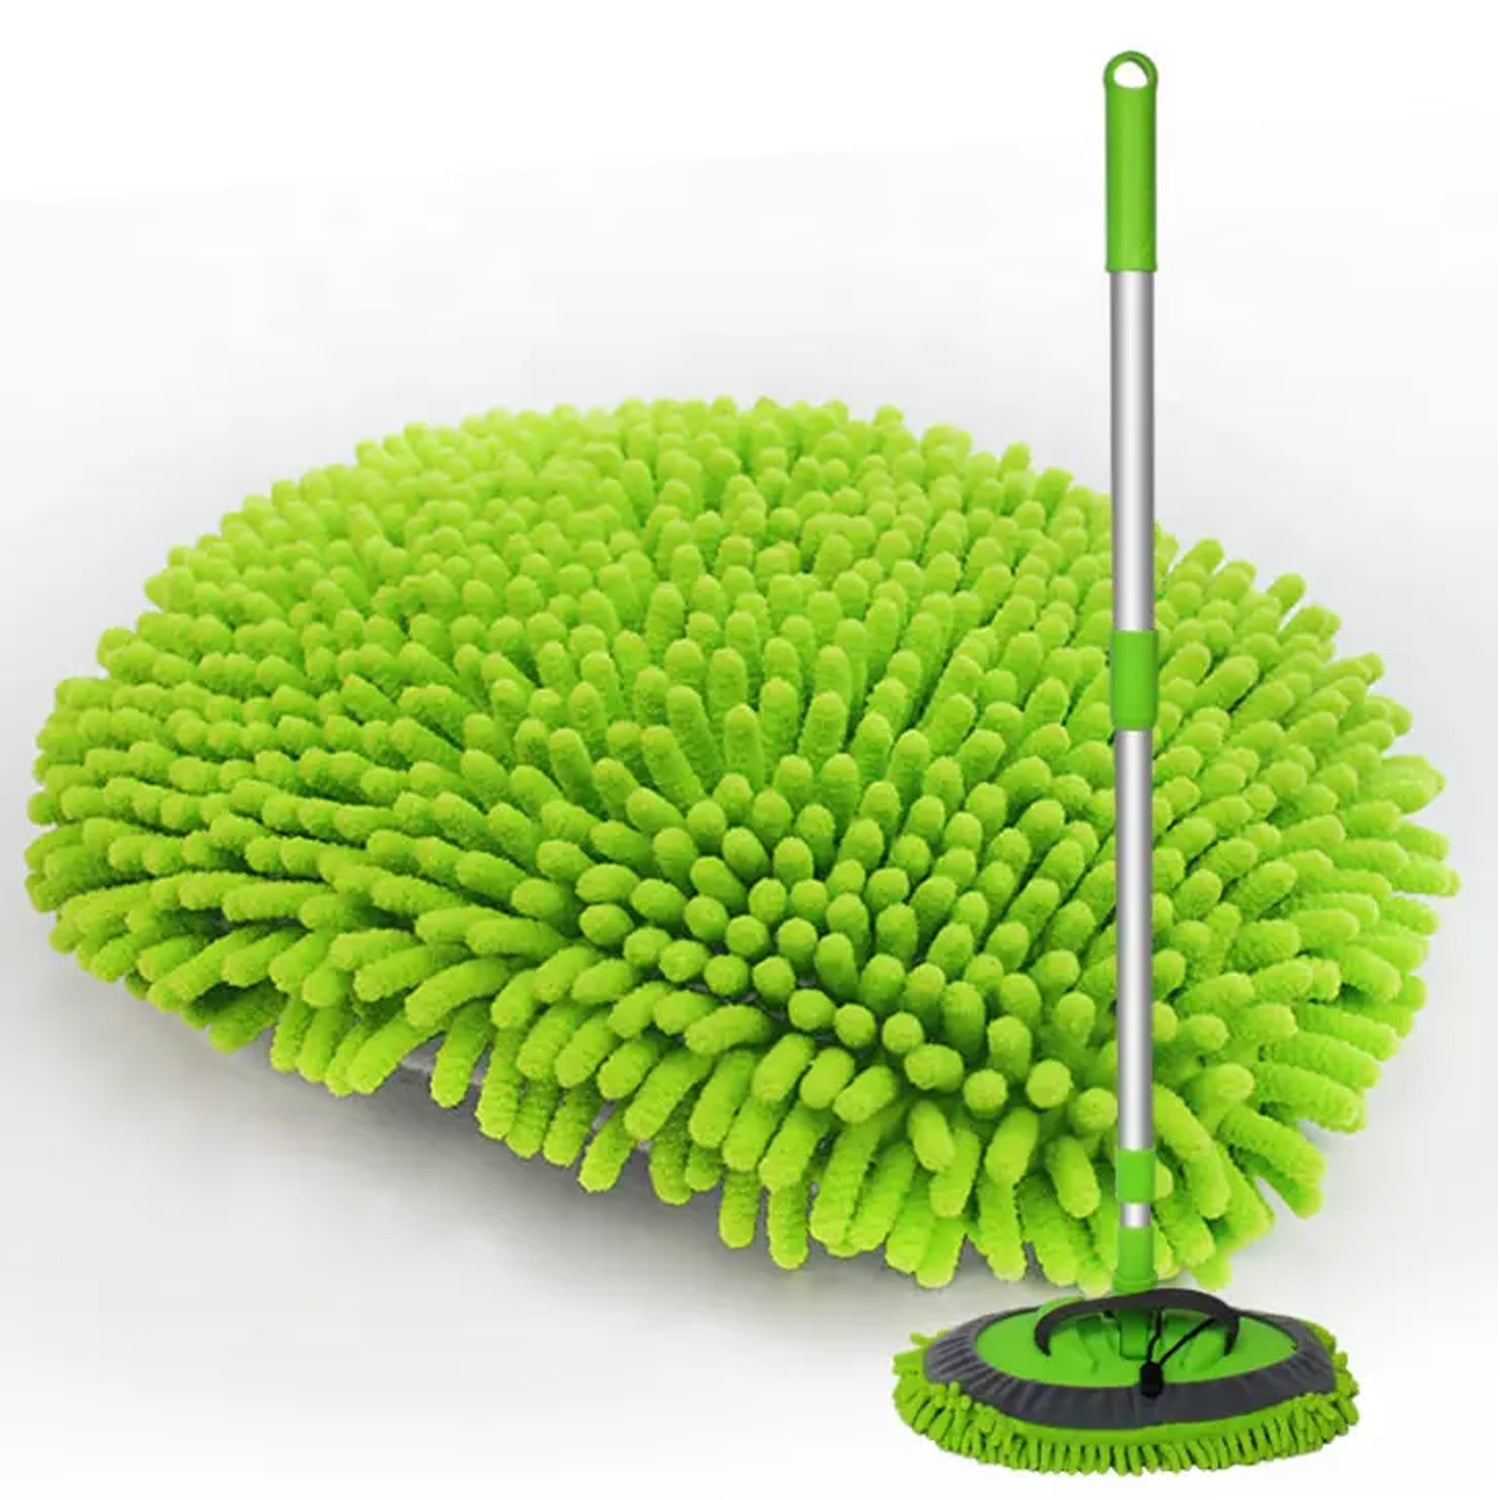 7848 MICROFIBER FLEXIBLE MOP CLEANING ACCESSORIES | MICROFIBER MOP | BRUSH | DRY/WET HOME, KITCHEN, OFFICE CLEANING BRUSH EXTENDABLE HANDLE DeoDap